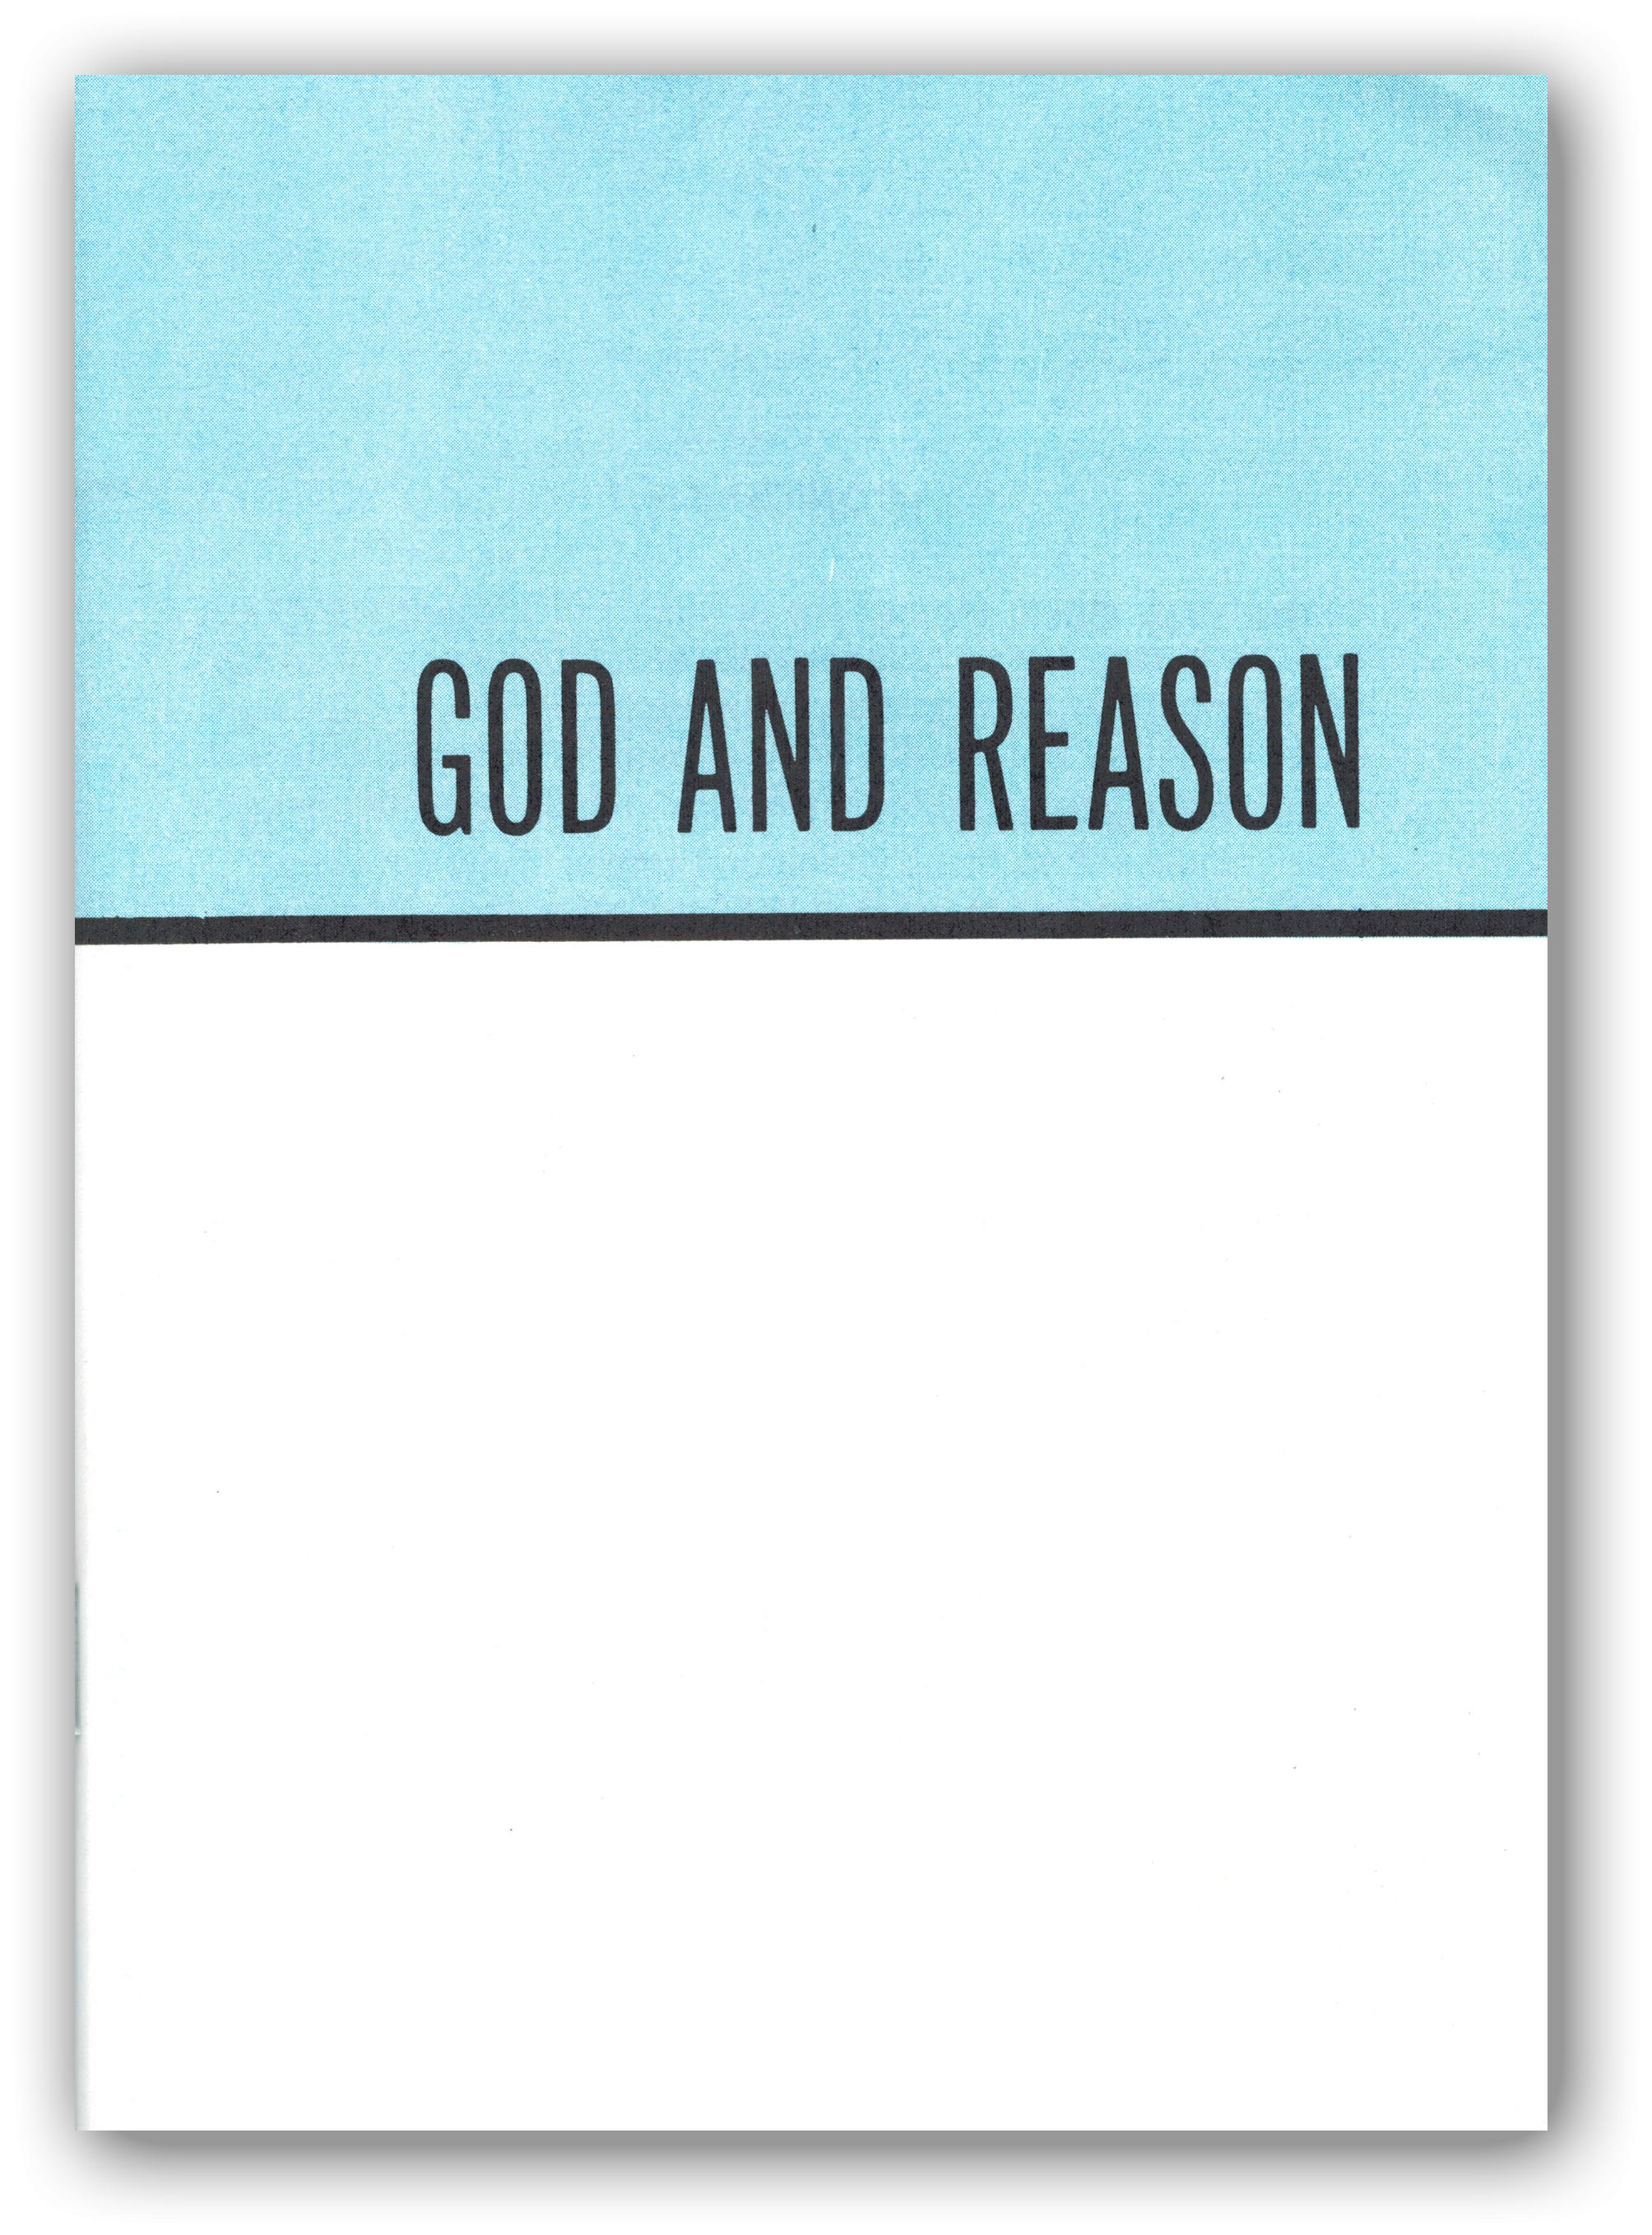 the reason for god pdf free download